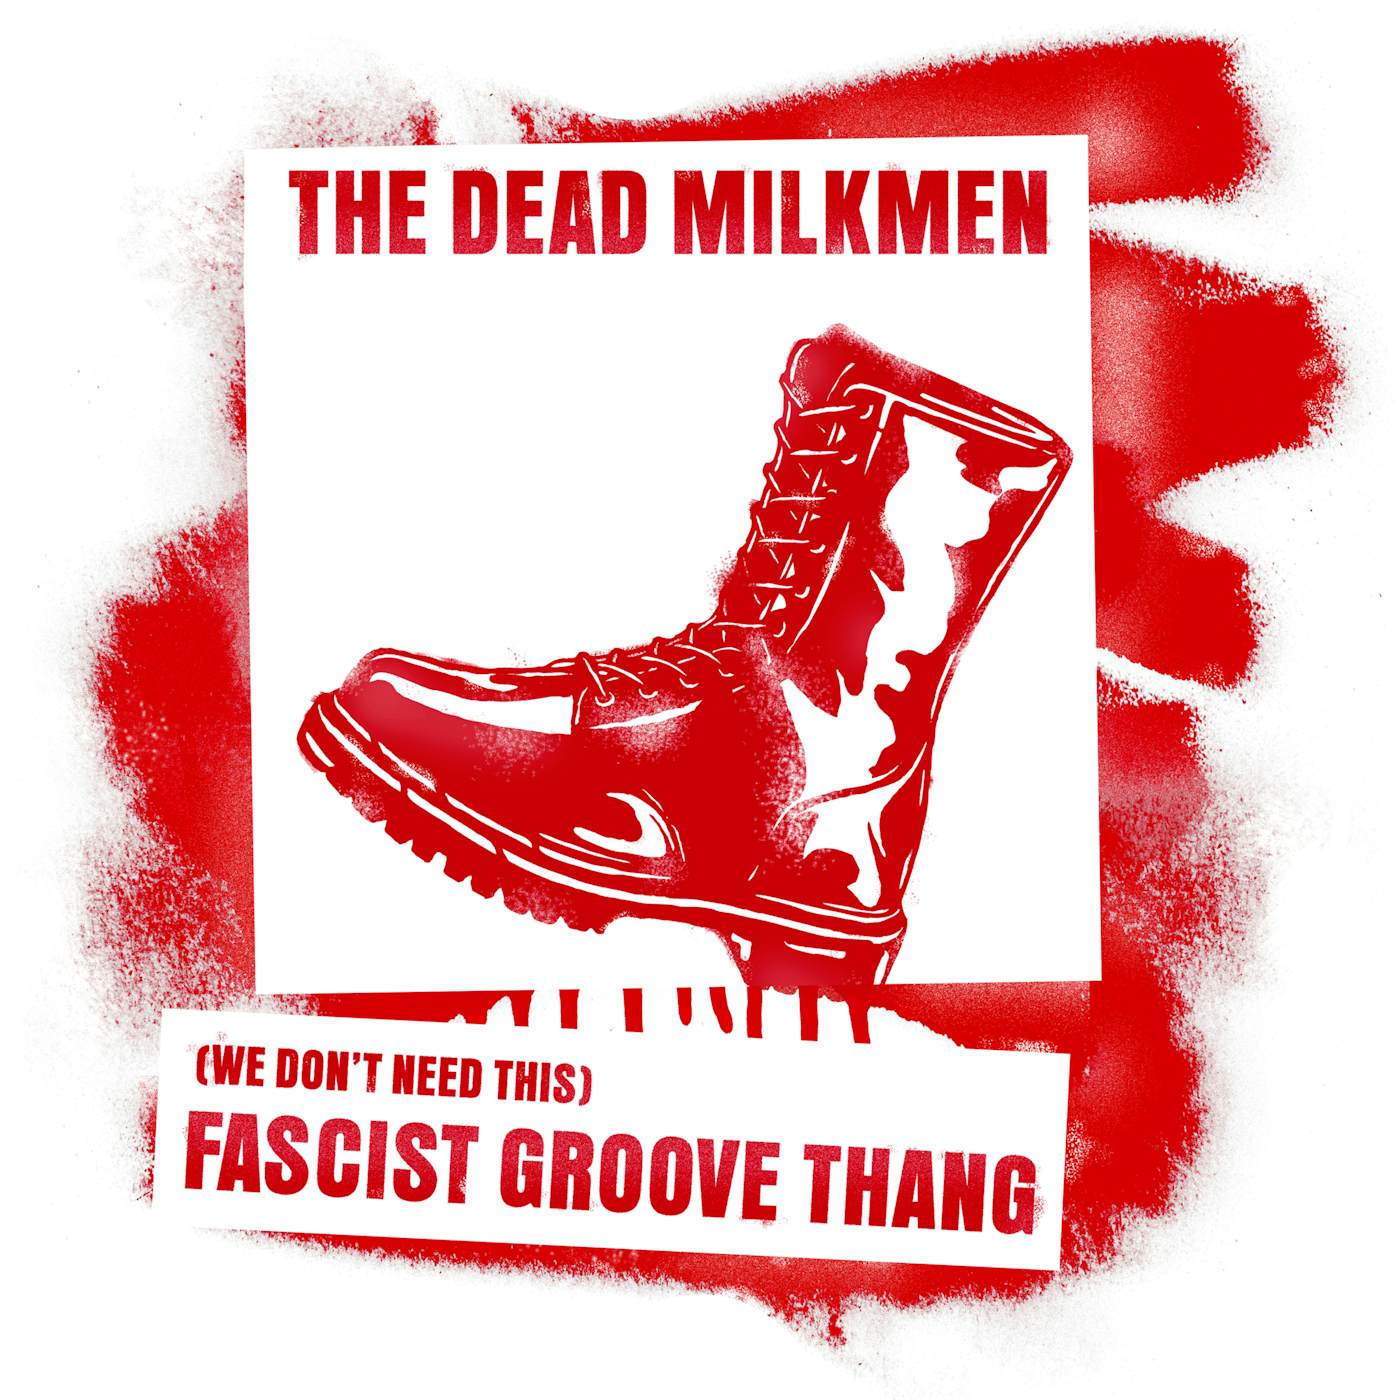 The Dead Milkmen We Don't Need This Fascist Groove Thang 2 Nd Pressing Vinyl Record